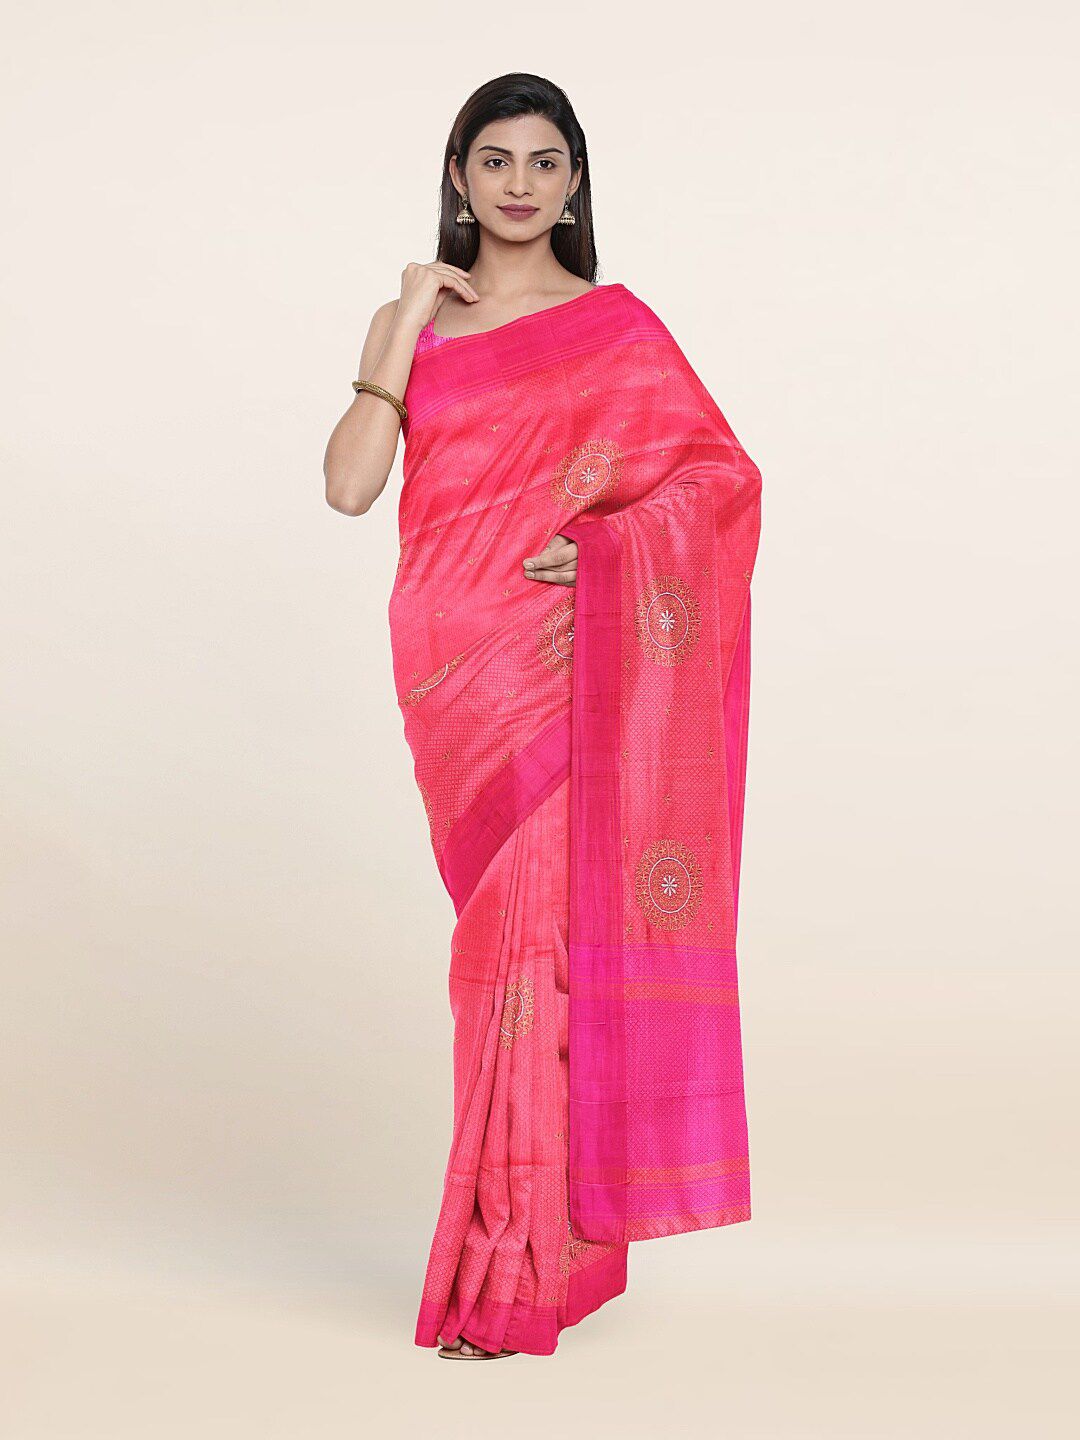 Pothys Women Pink Floral Embroidered Art Silk Saree Price in India